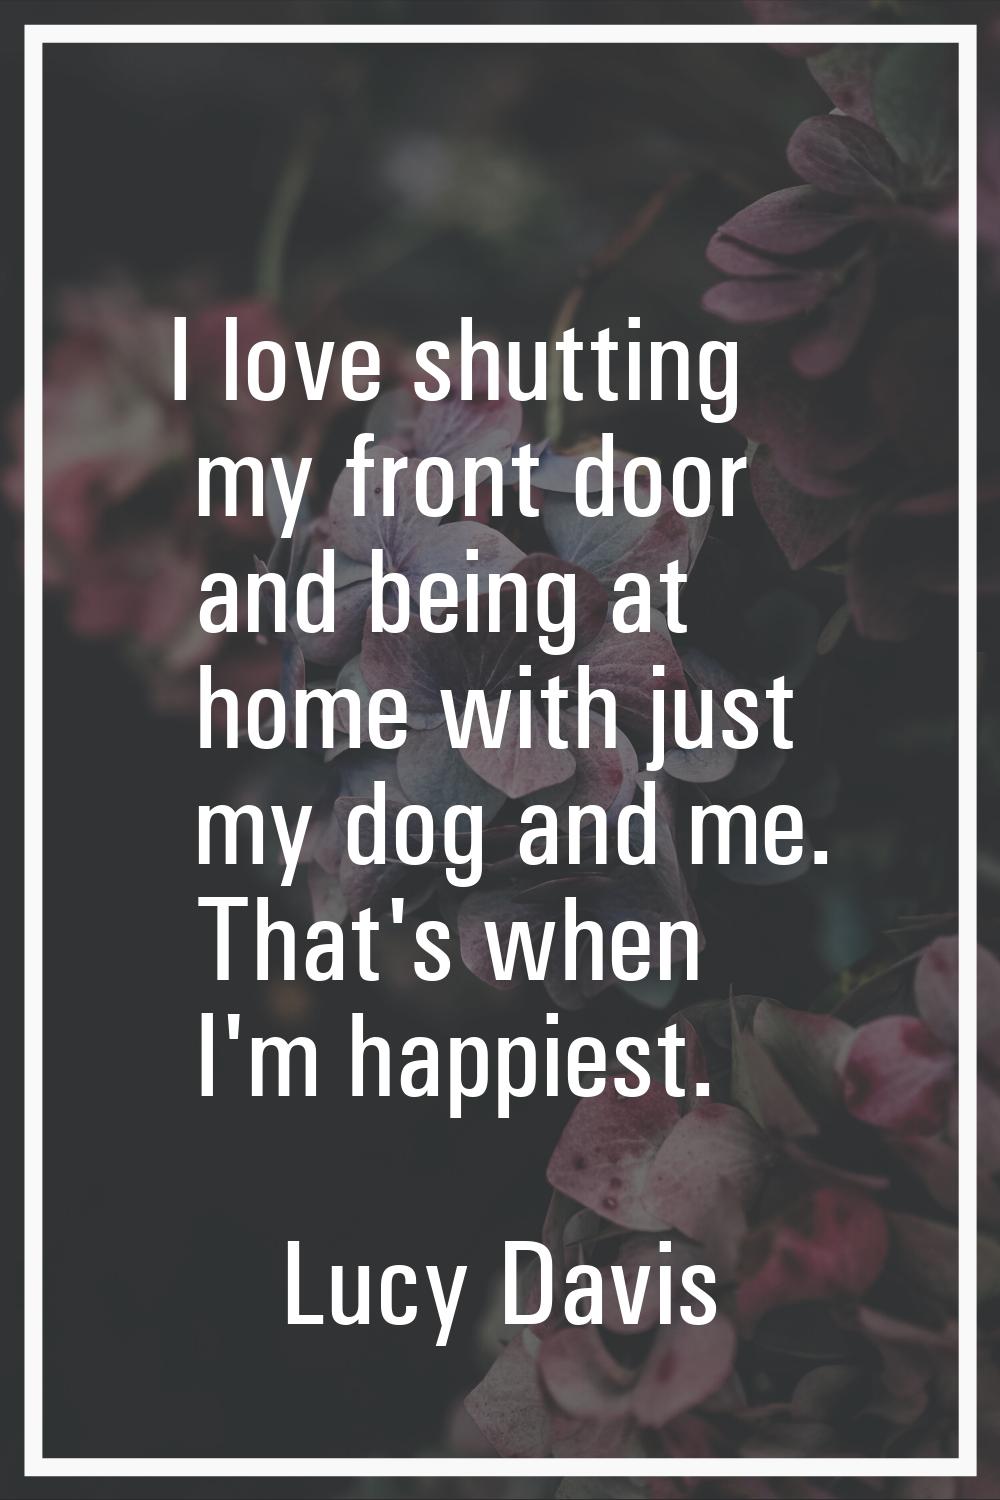 I love shutting my front door and being at home with just my dog and me. That's when I'm happiest.